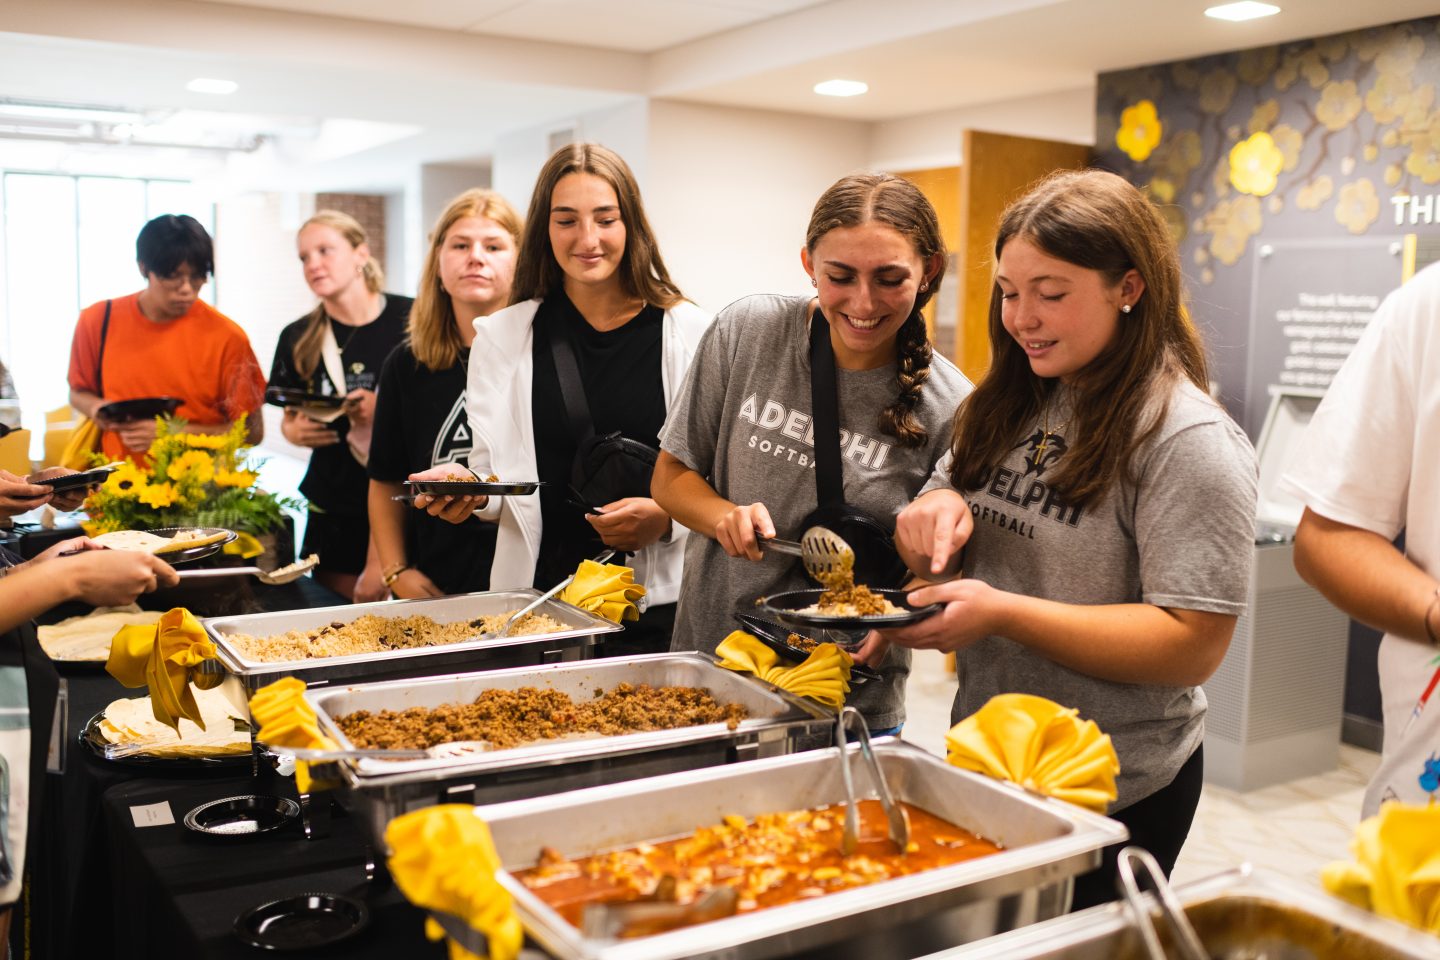 A group of young women, some in Adelphi Softball t-shirts, at a buffet, serving themselves from chafing dishes filled with various foods, in a brightly lit indoor setting.